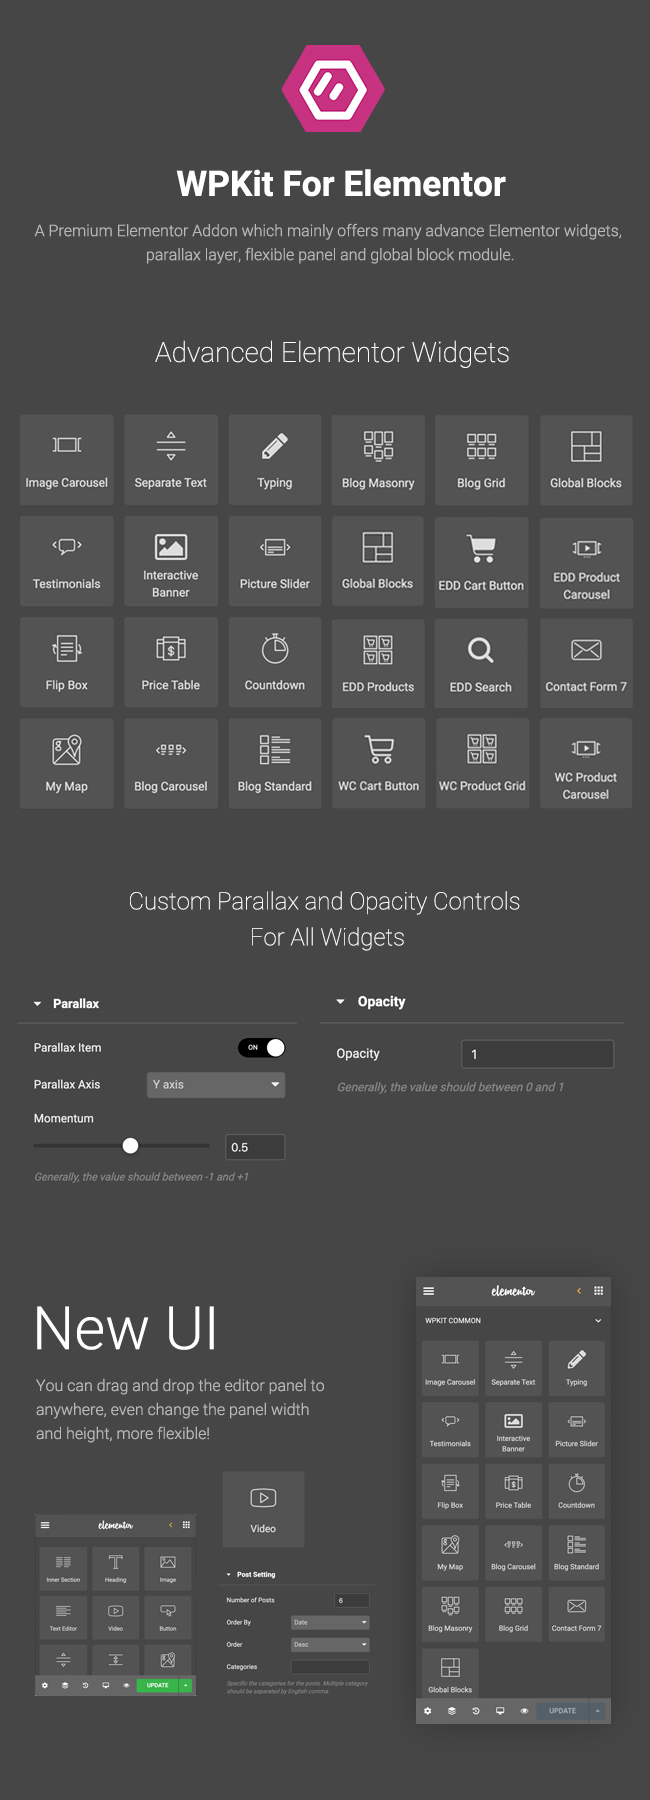 WPKit For Elementor - Advanced Elementor Widgets Collection & Parallax Layer